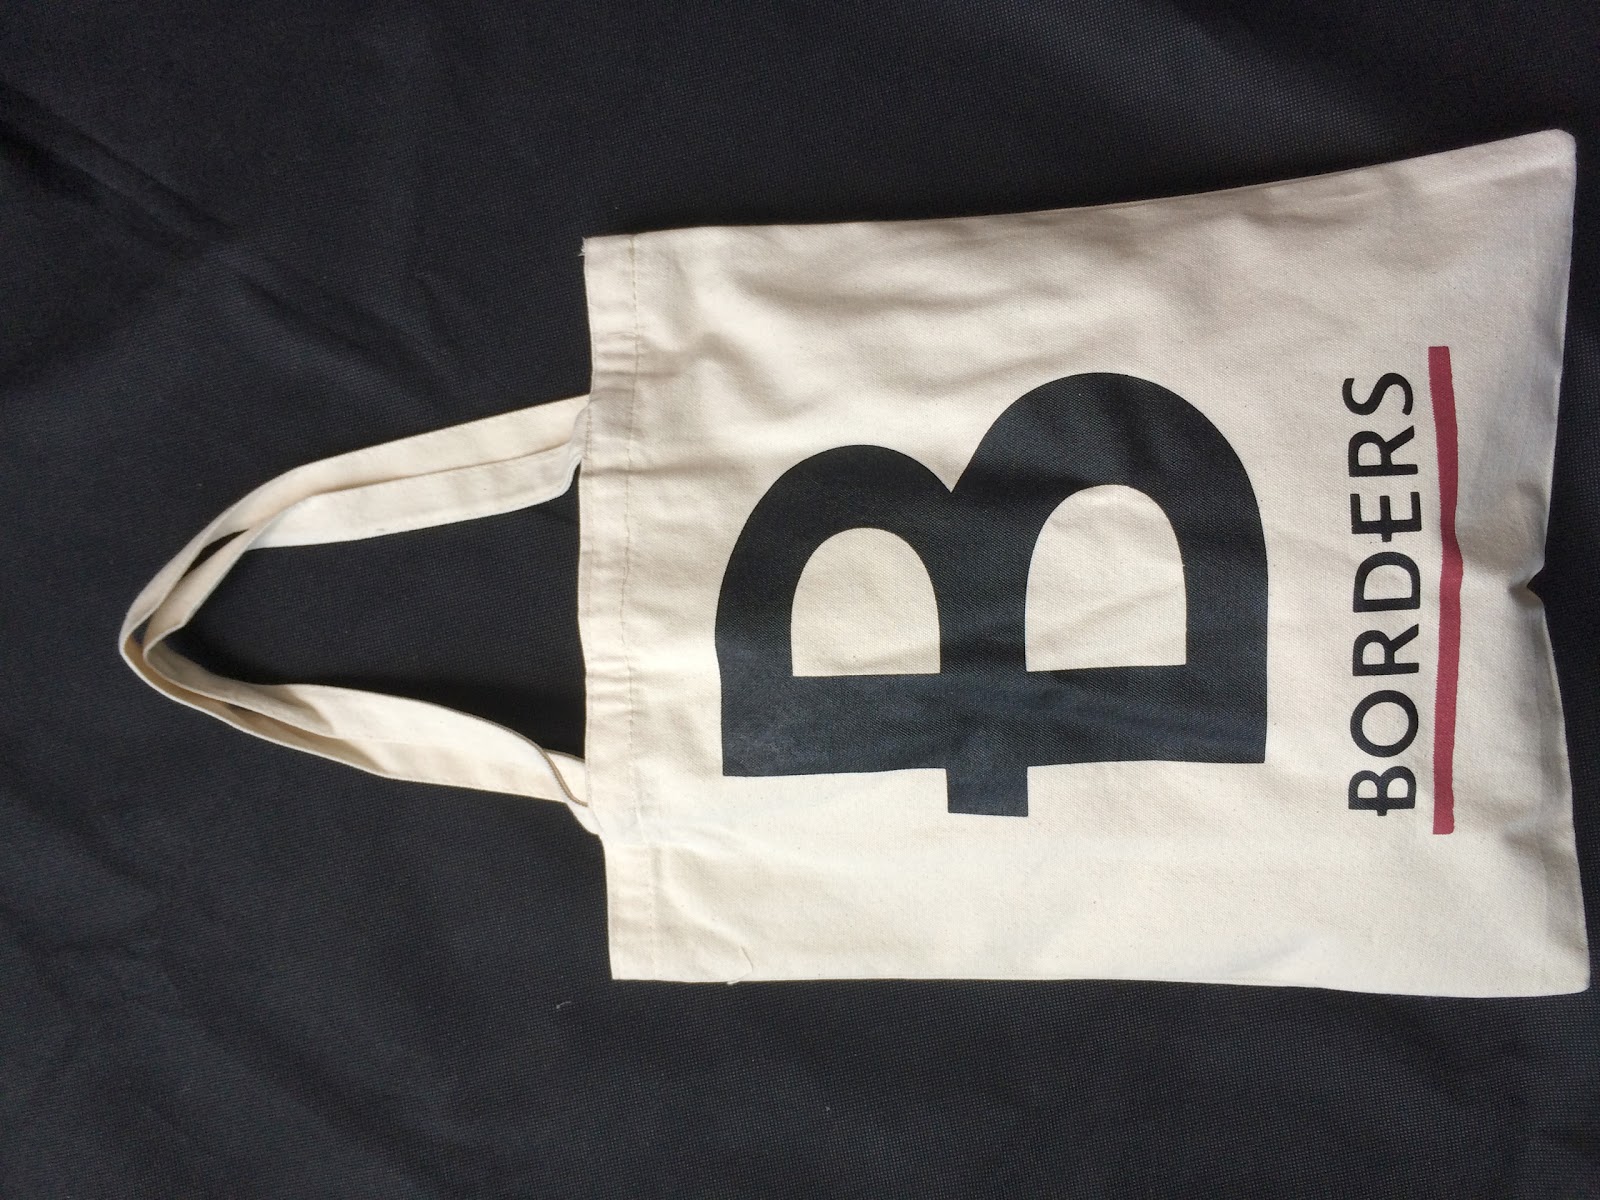 ... choose any of our tote bag and make your own design onto the tote bag